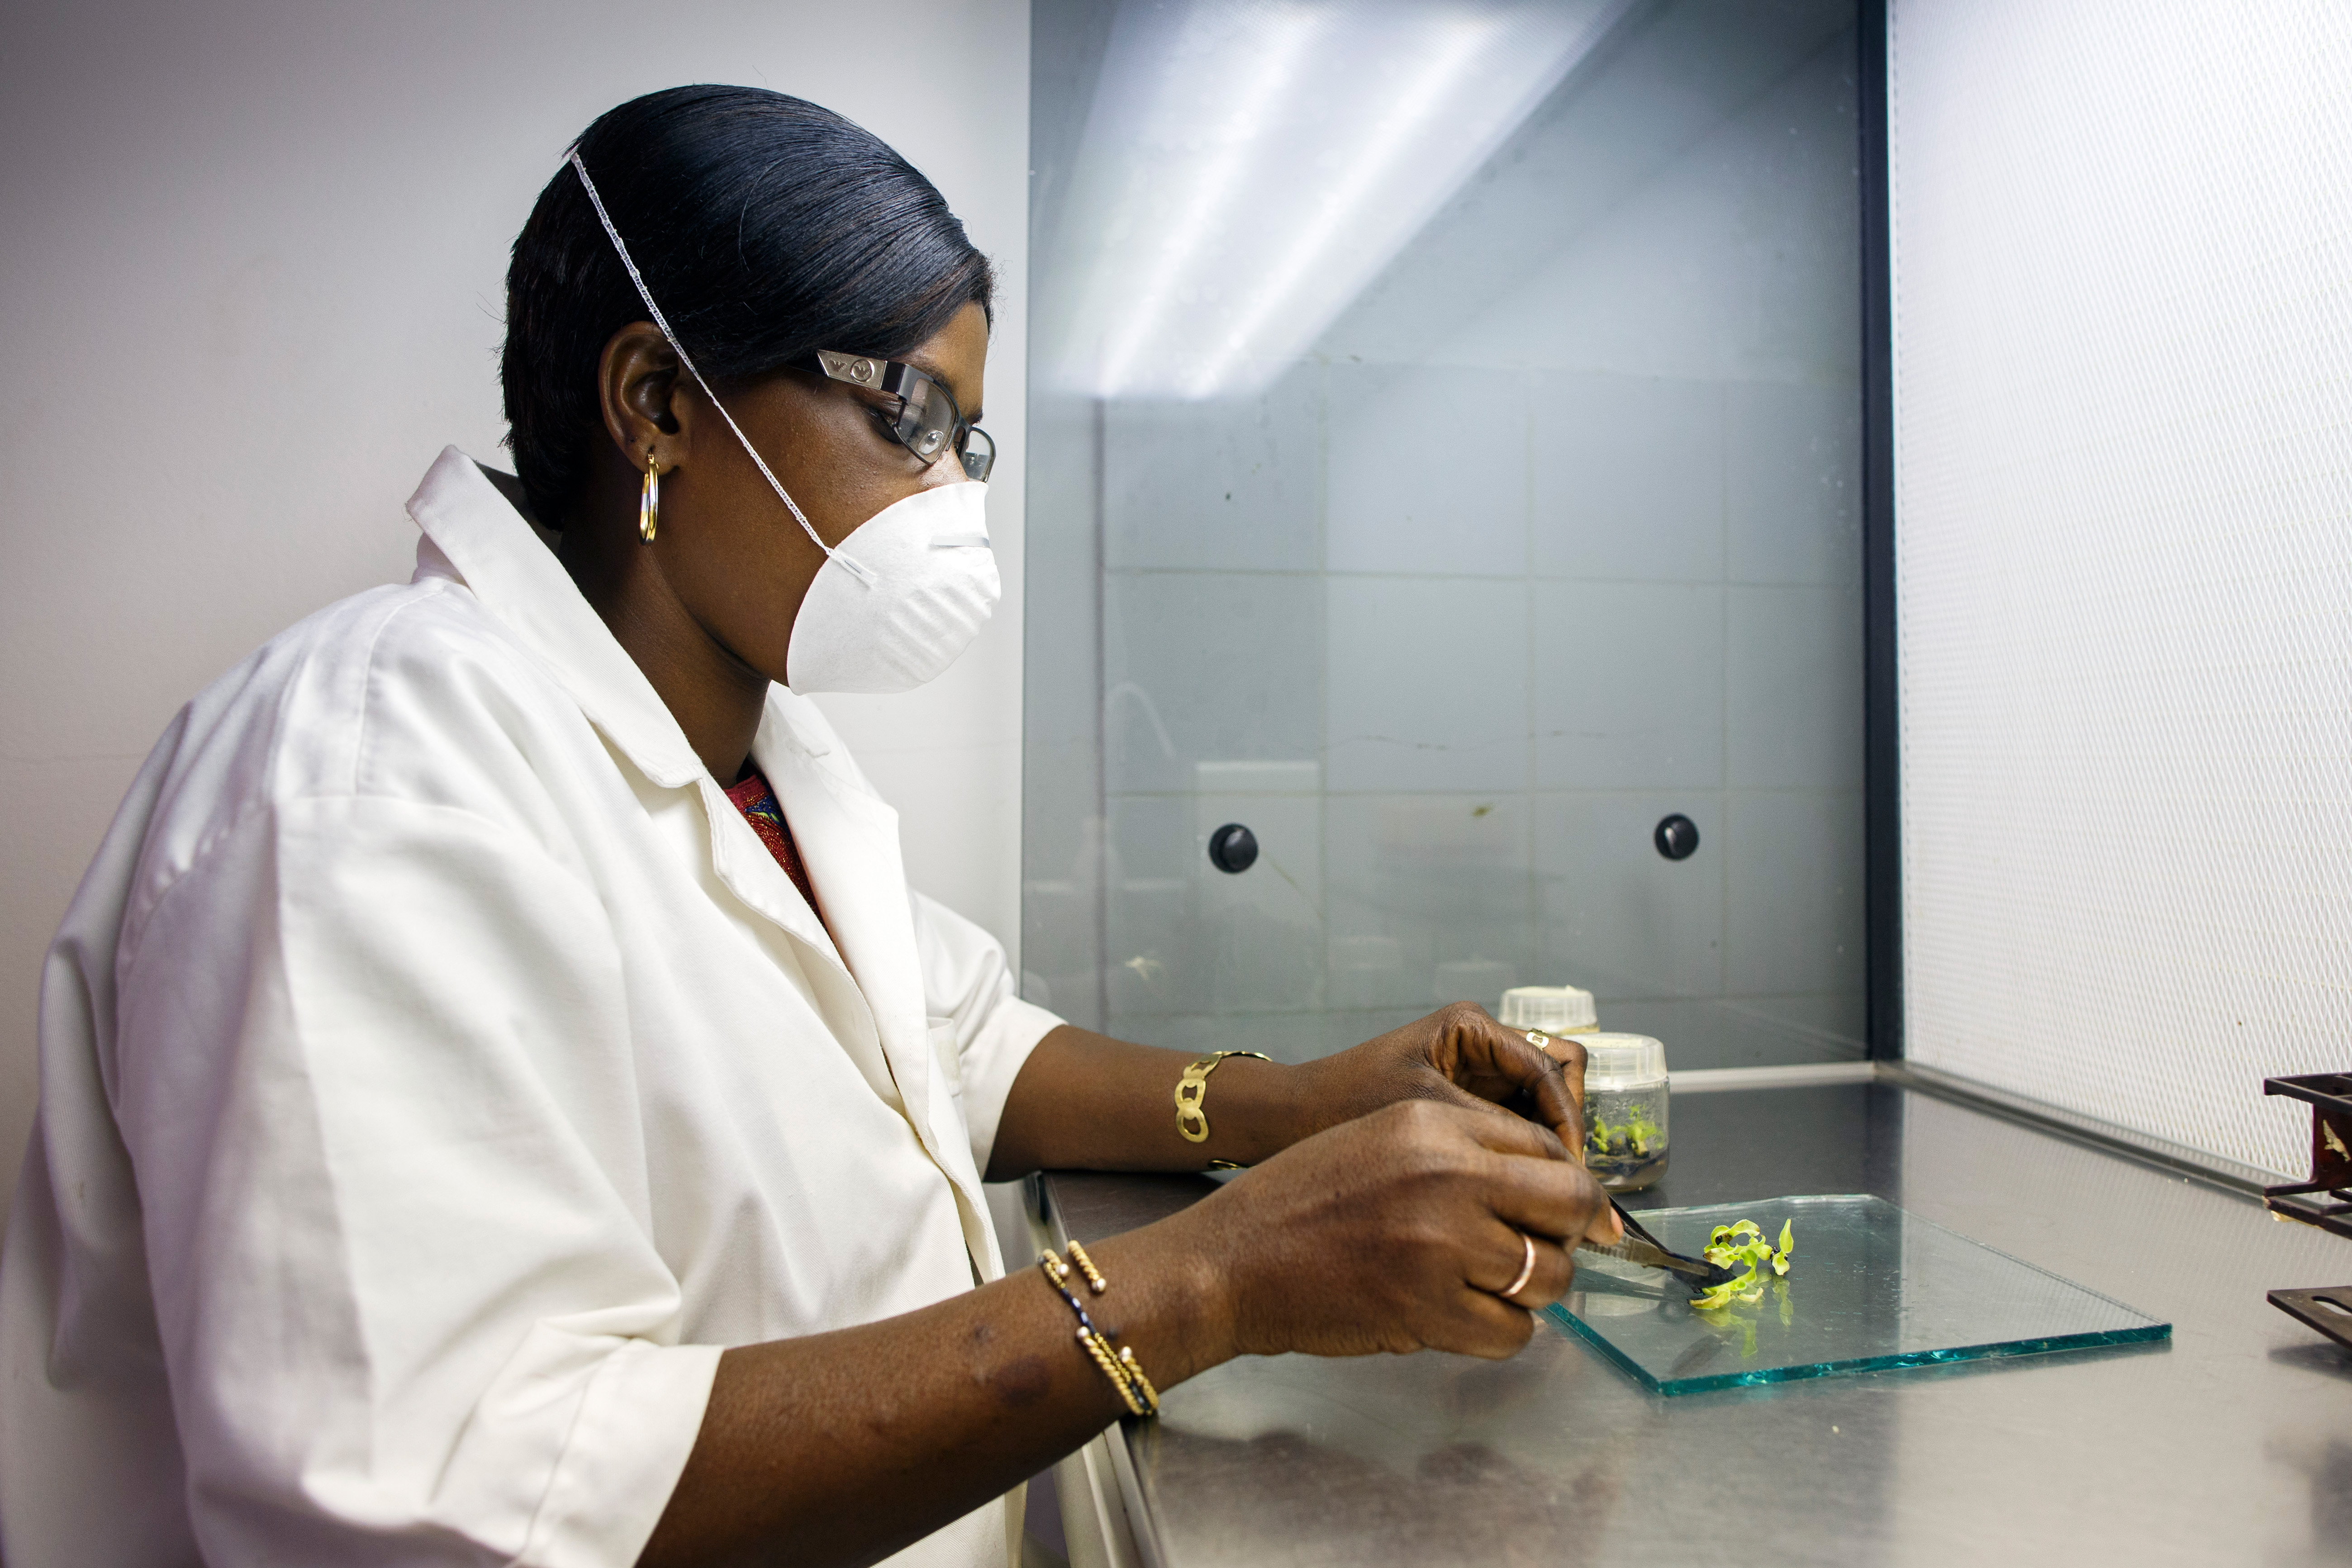 An employee of the Institute for Applied Agricultural Research and Training in Katibougou, Mali, dissects potato plants in the laboratory.